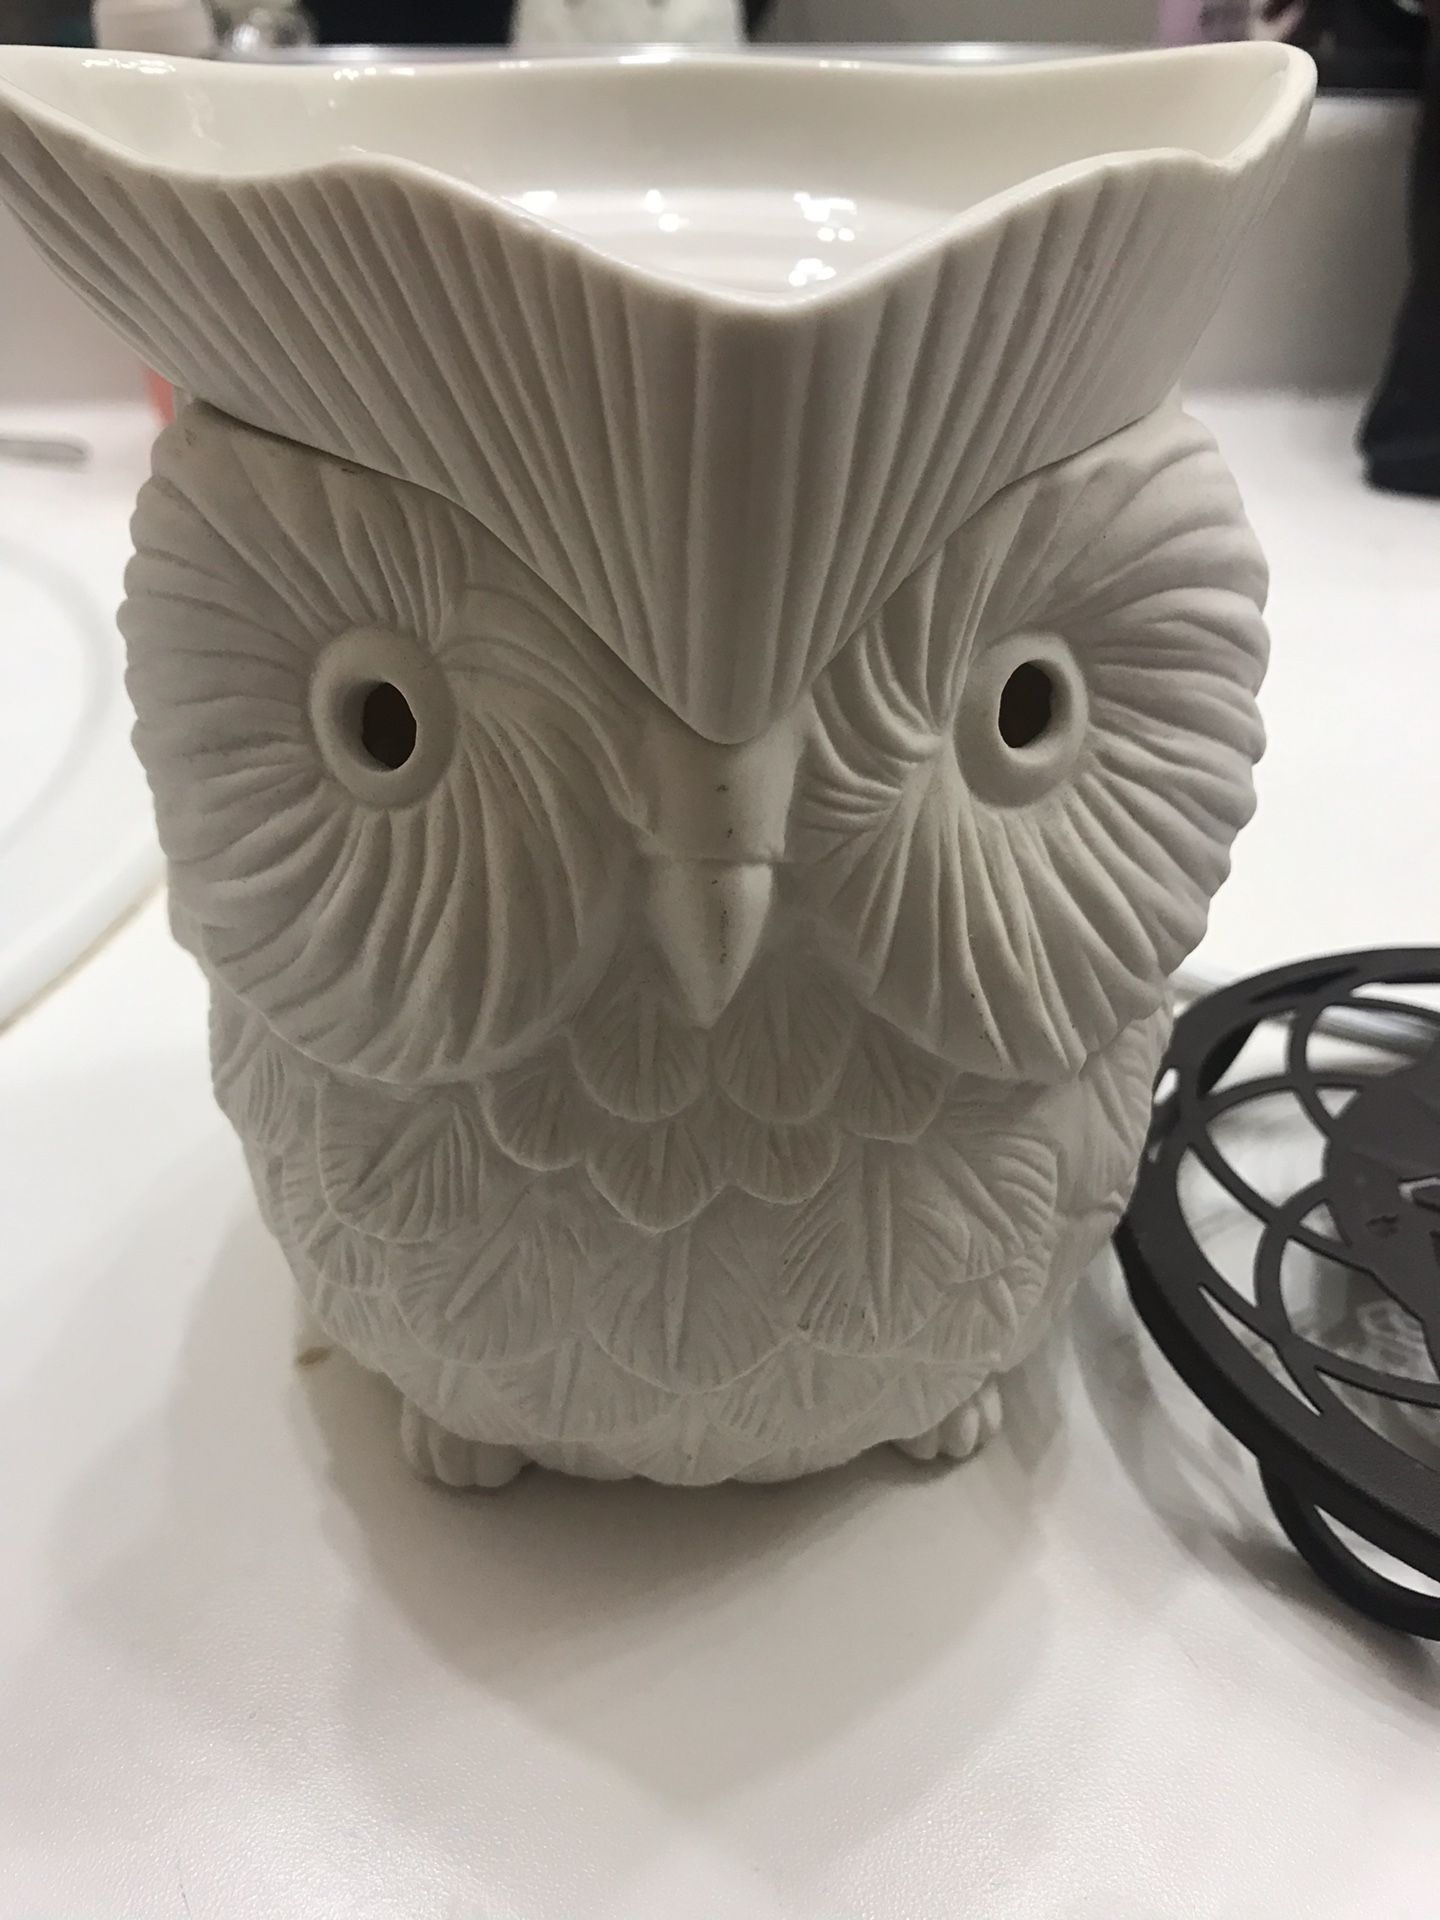 Scentsy warmer (Owl) with stand